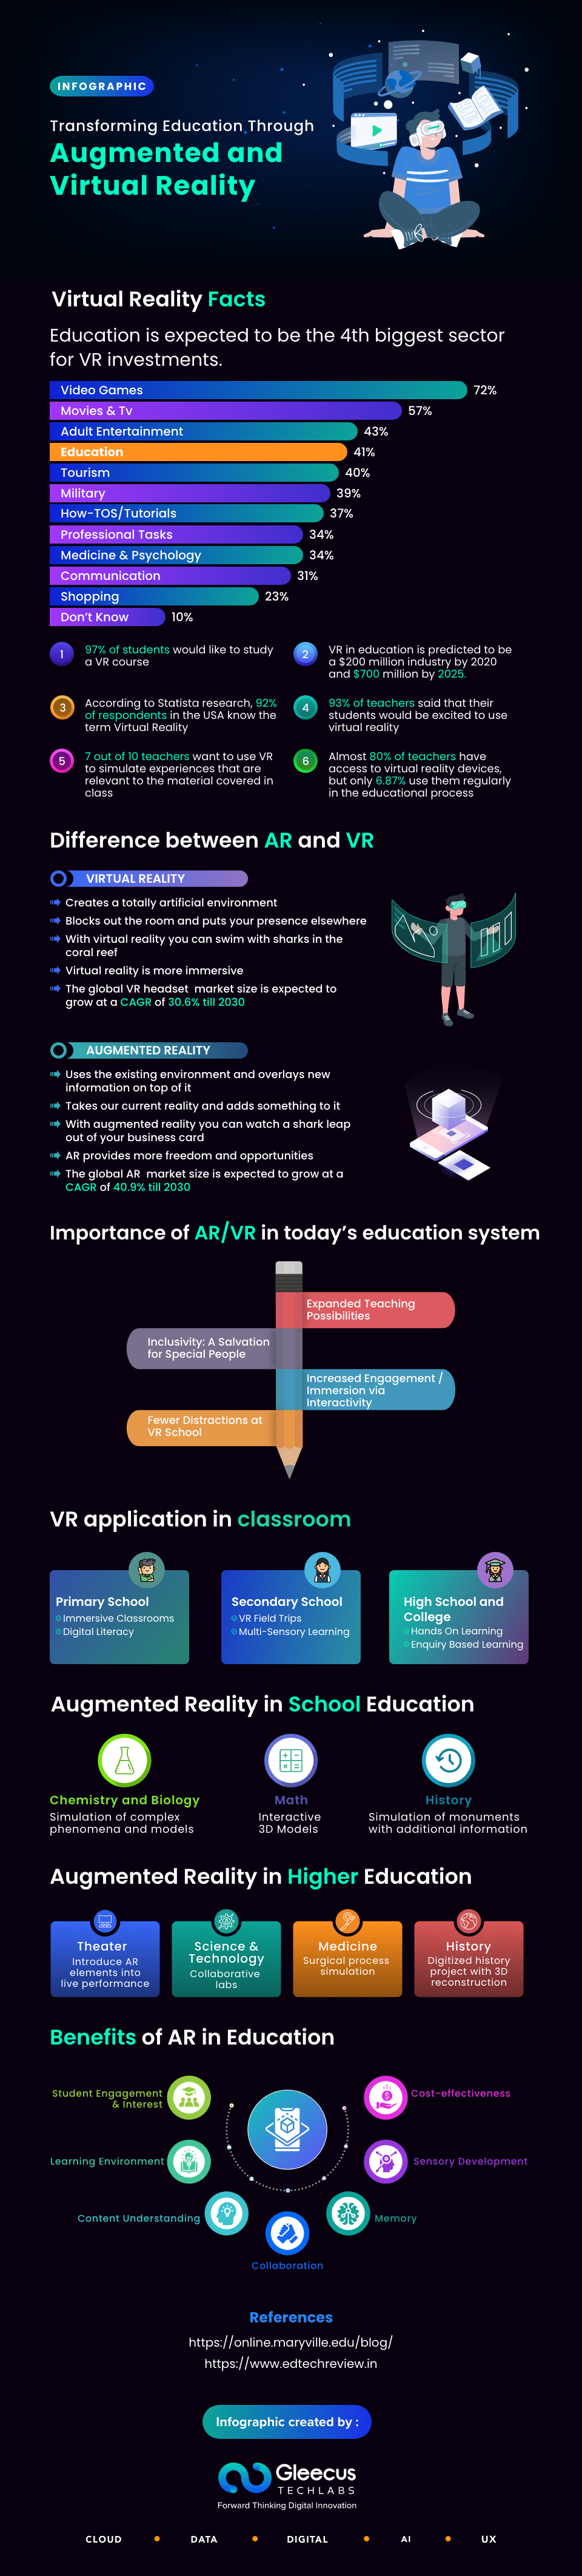 Transforming Education Through Augmented and Virtual Reality - Infographic